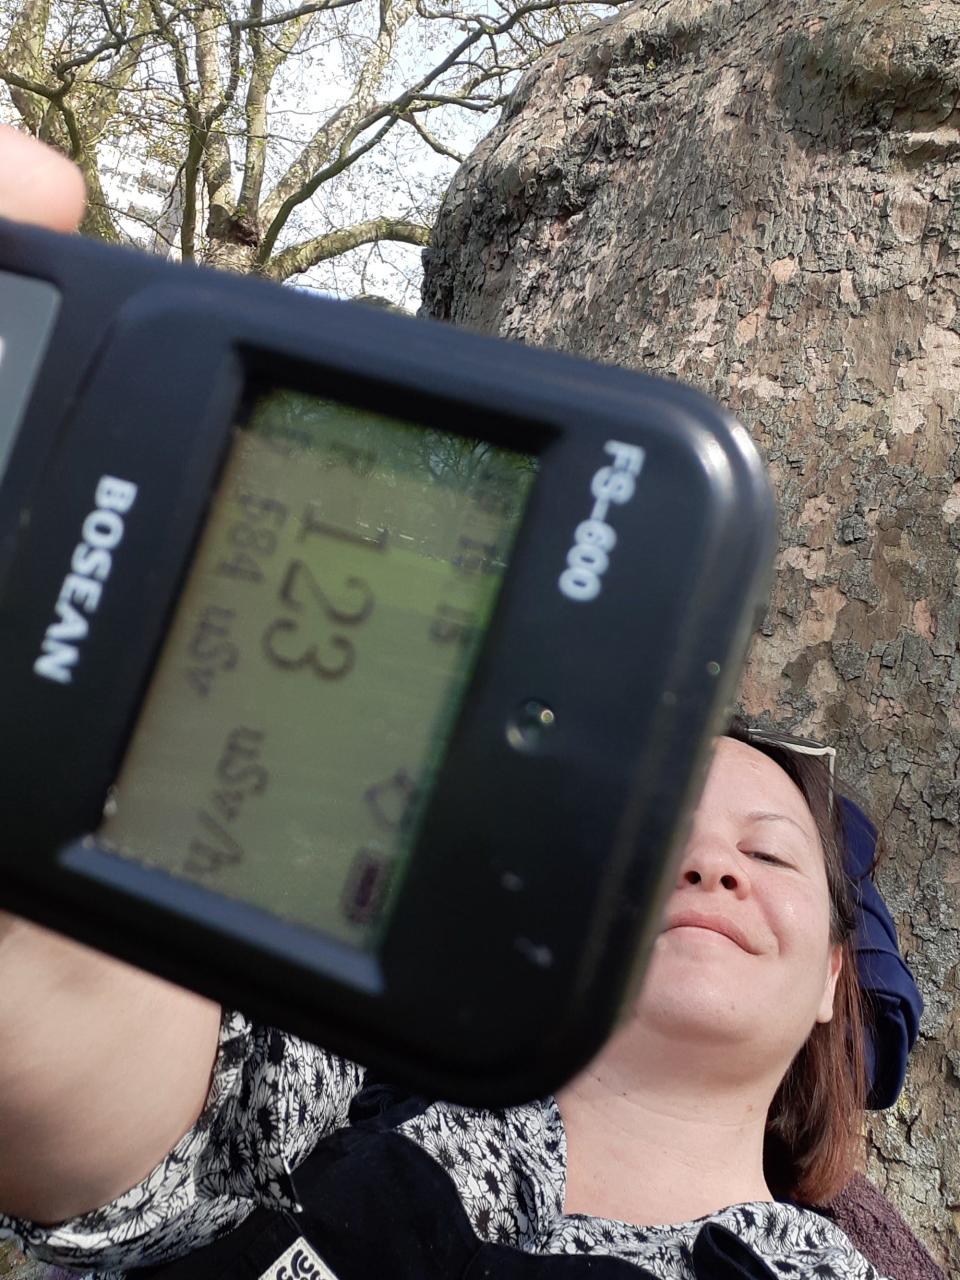 Marianne Guenot sits under a tree holding a Geiger counter at arm's length reading 123 uSv/h..